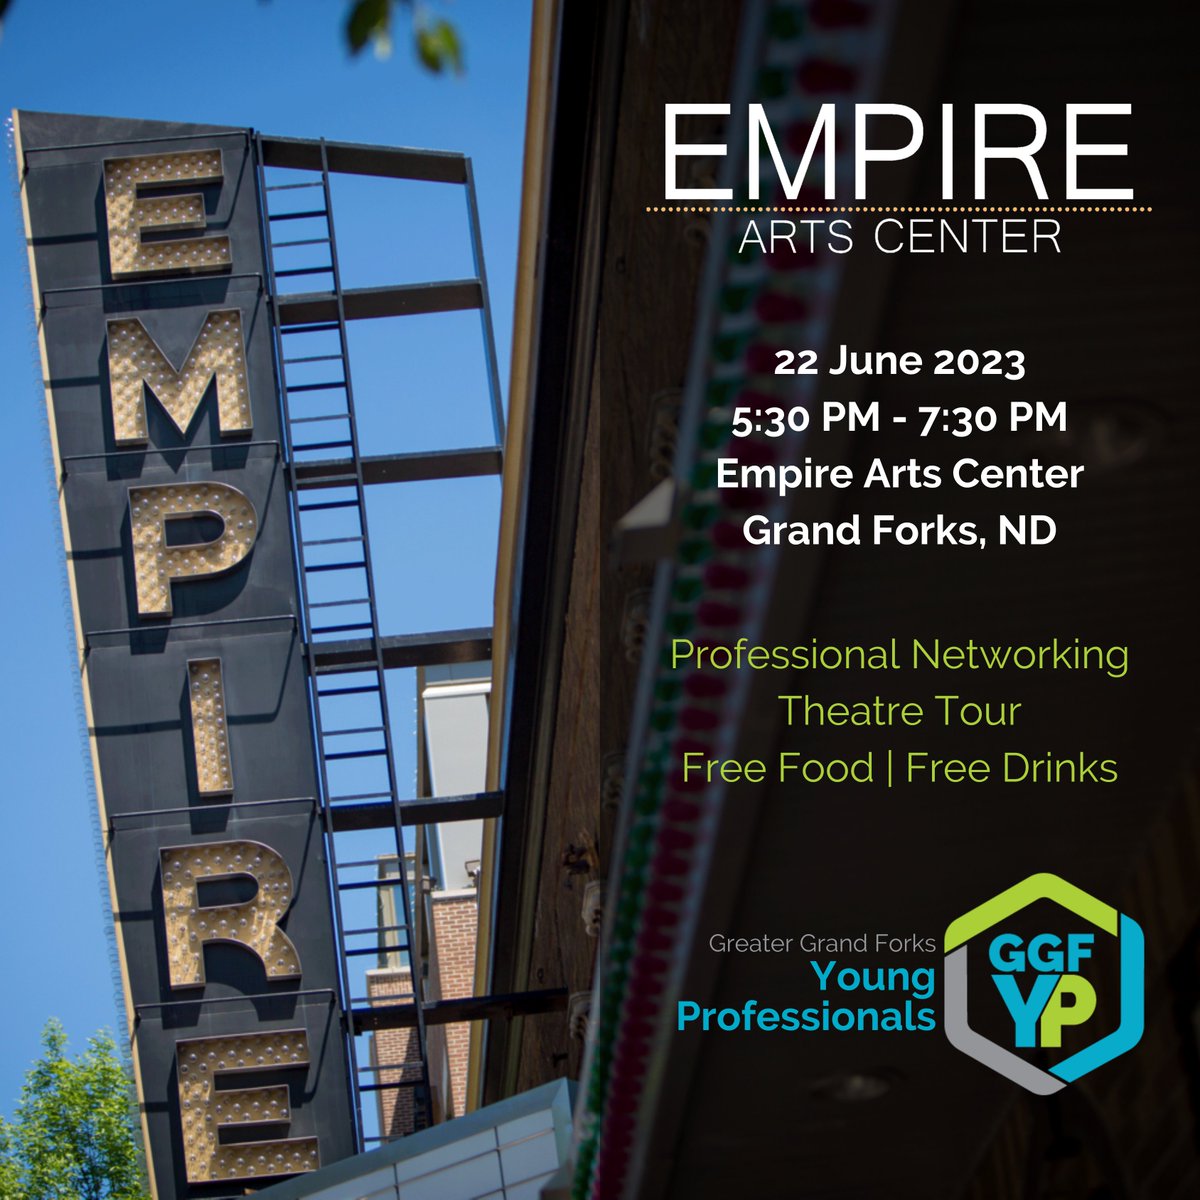 Join us next Thursday, 22 June 2023, for our #ggfyp 'Night At The Empire'. We'll have free drinks, free food, and theatre tours from 5:30 PM - 7:30 PM!

#youngprofessionals #grandforksnd #greatergrandforks #socialevents #empireartscenter